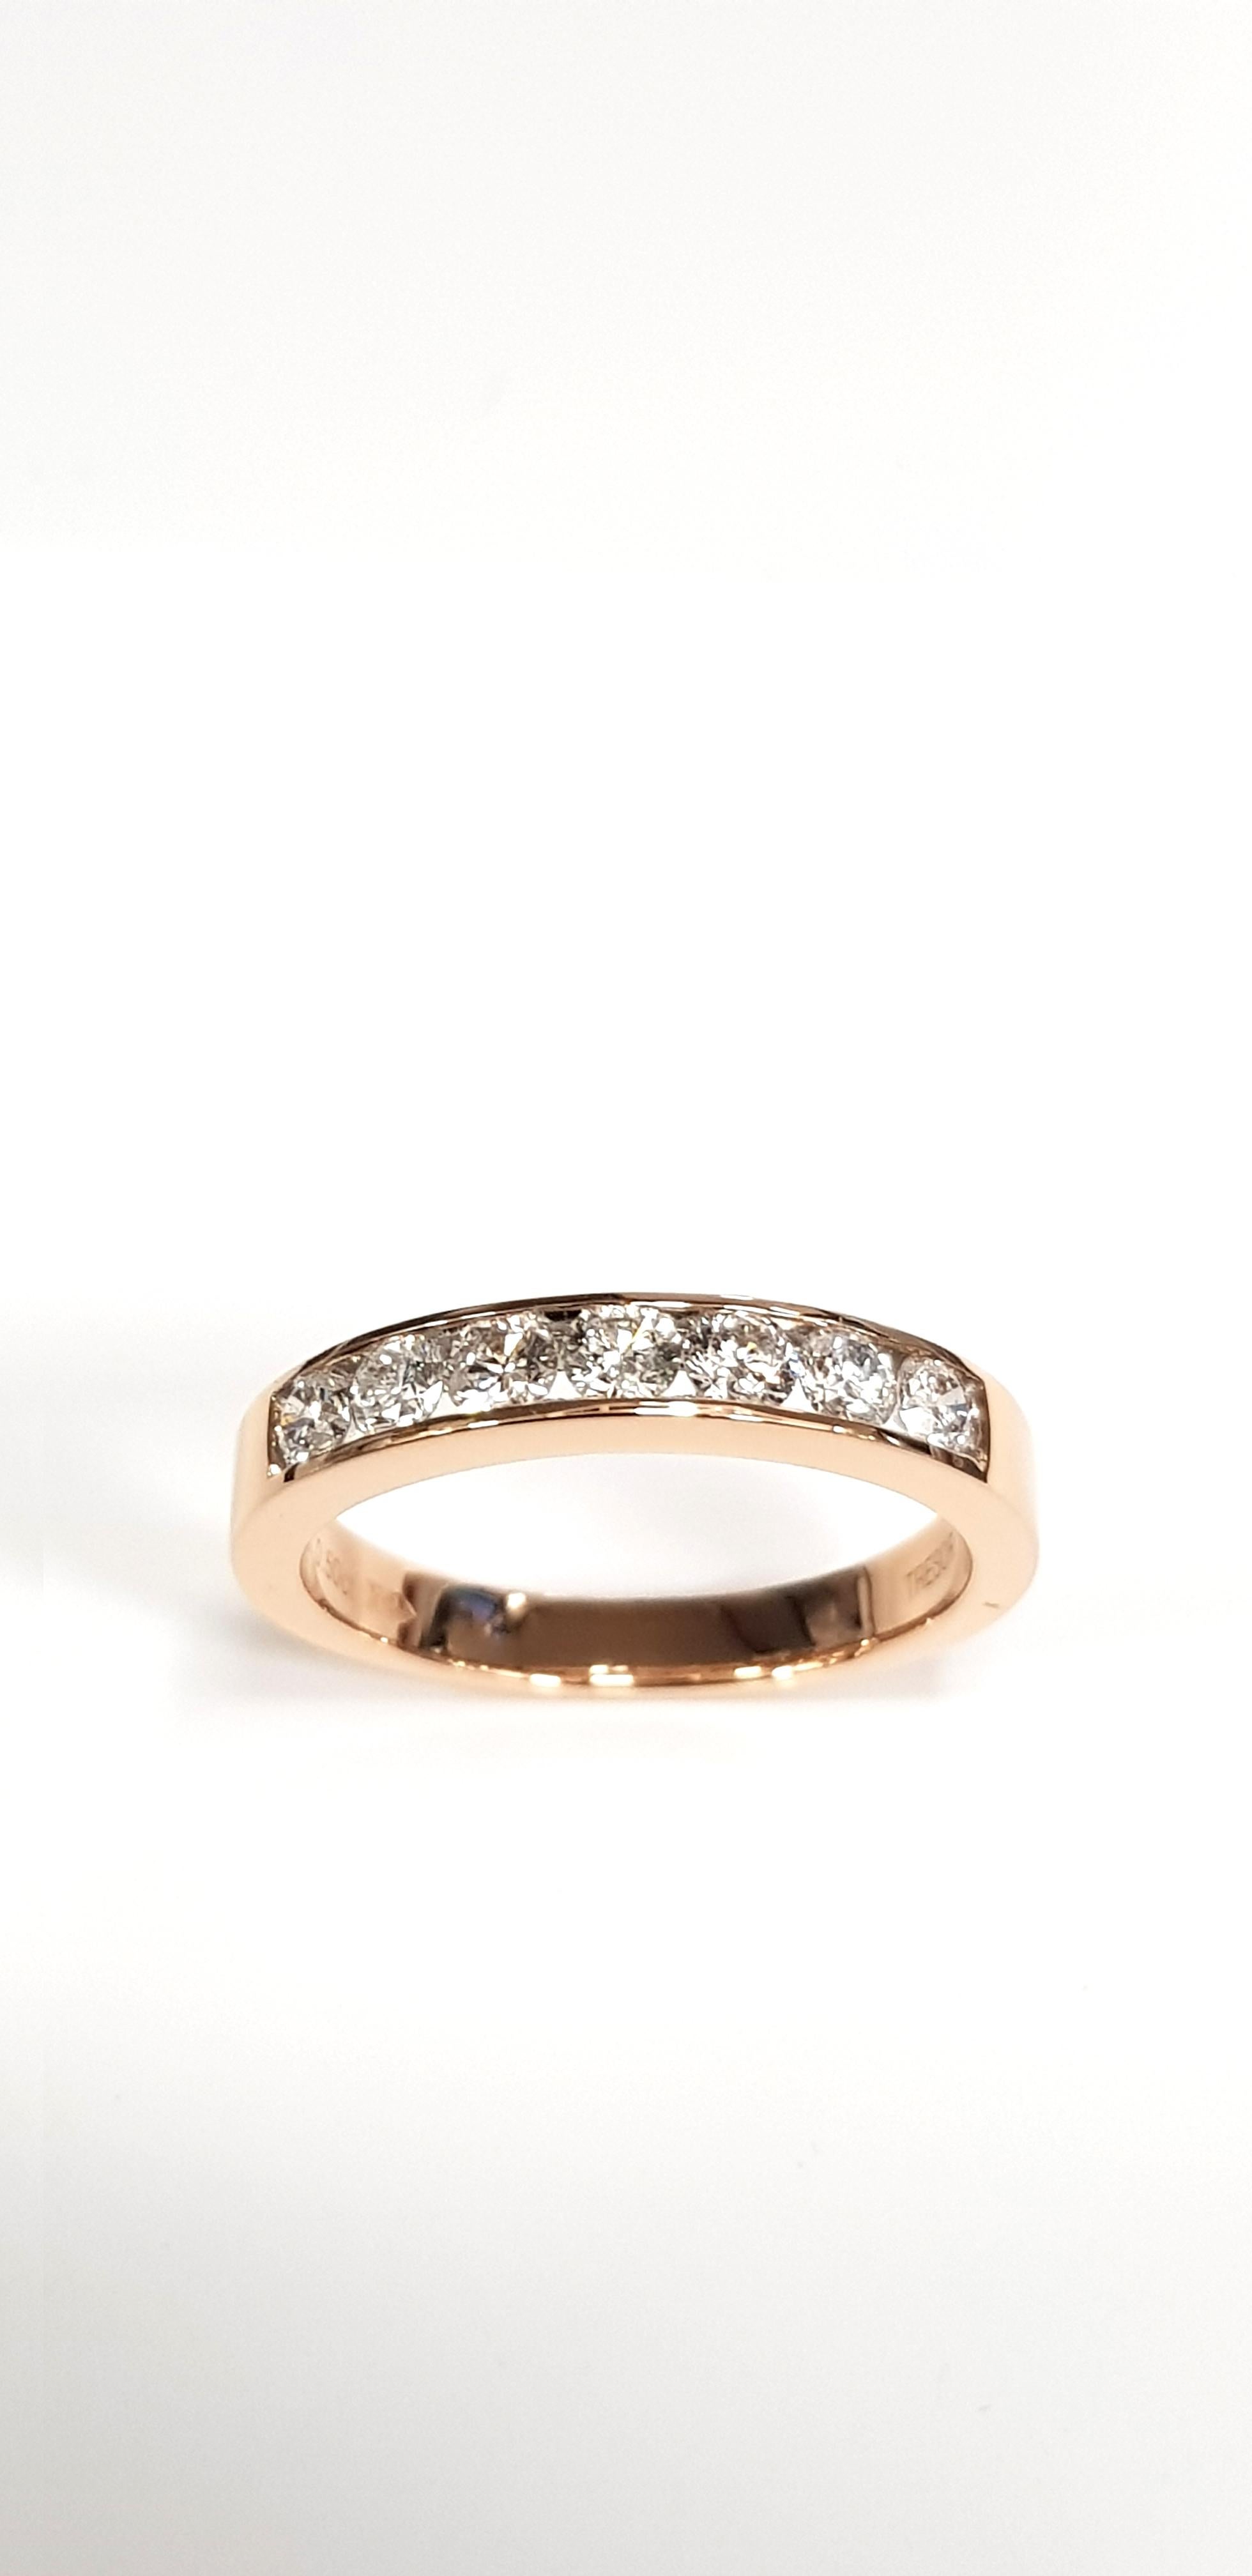 0.50 Carat Round Diamond Channel Set 18 KT Rose Gold Half Eternity Band Ring   For Sale 8